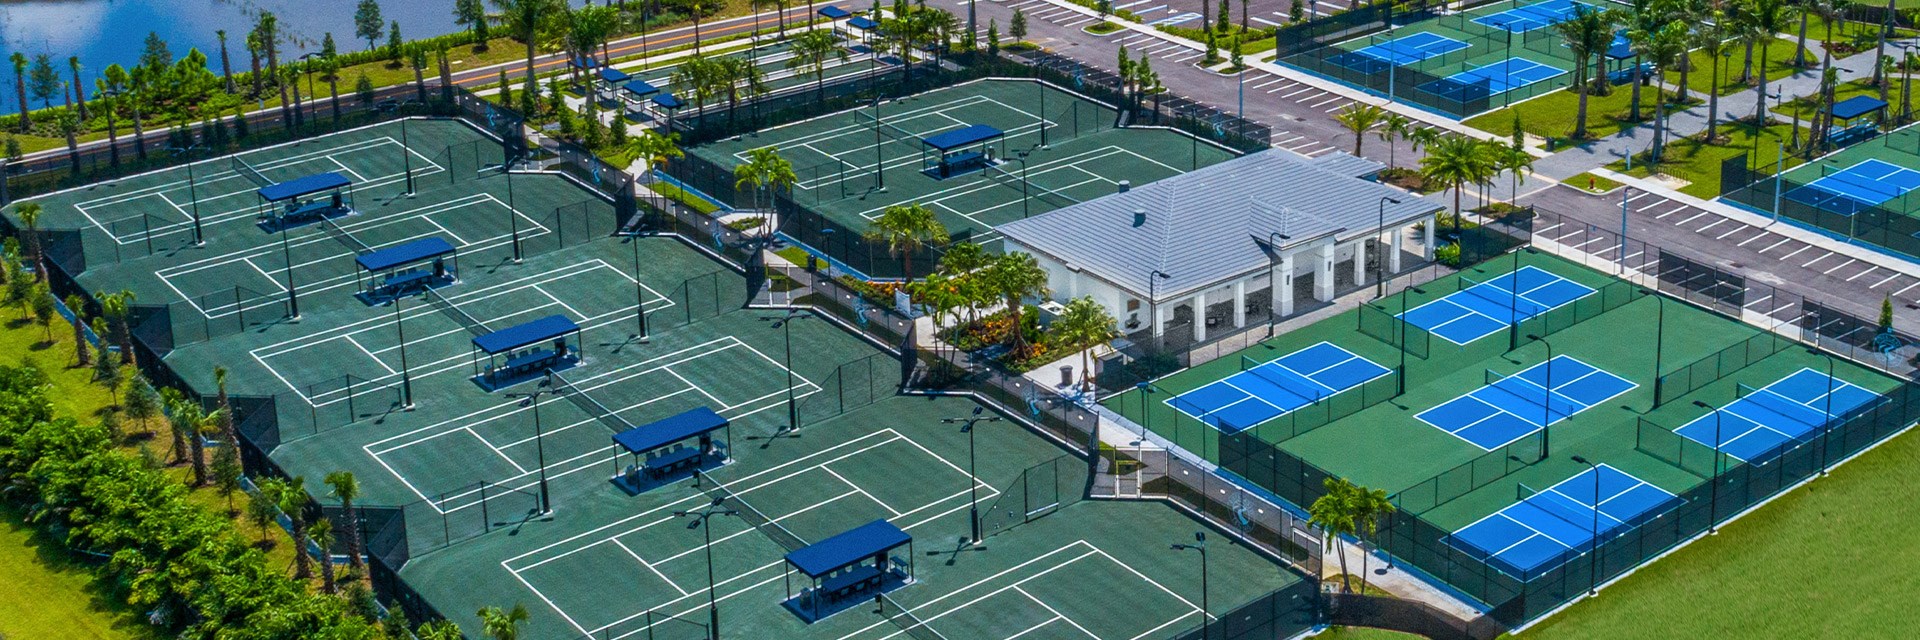 OVER 40 OUTDOOR SPORTS COURTS